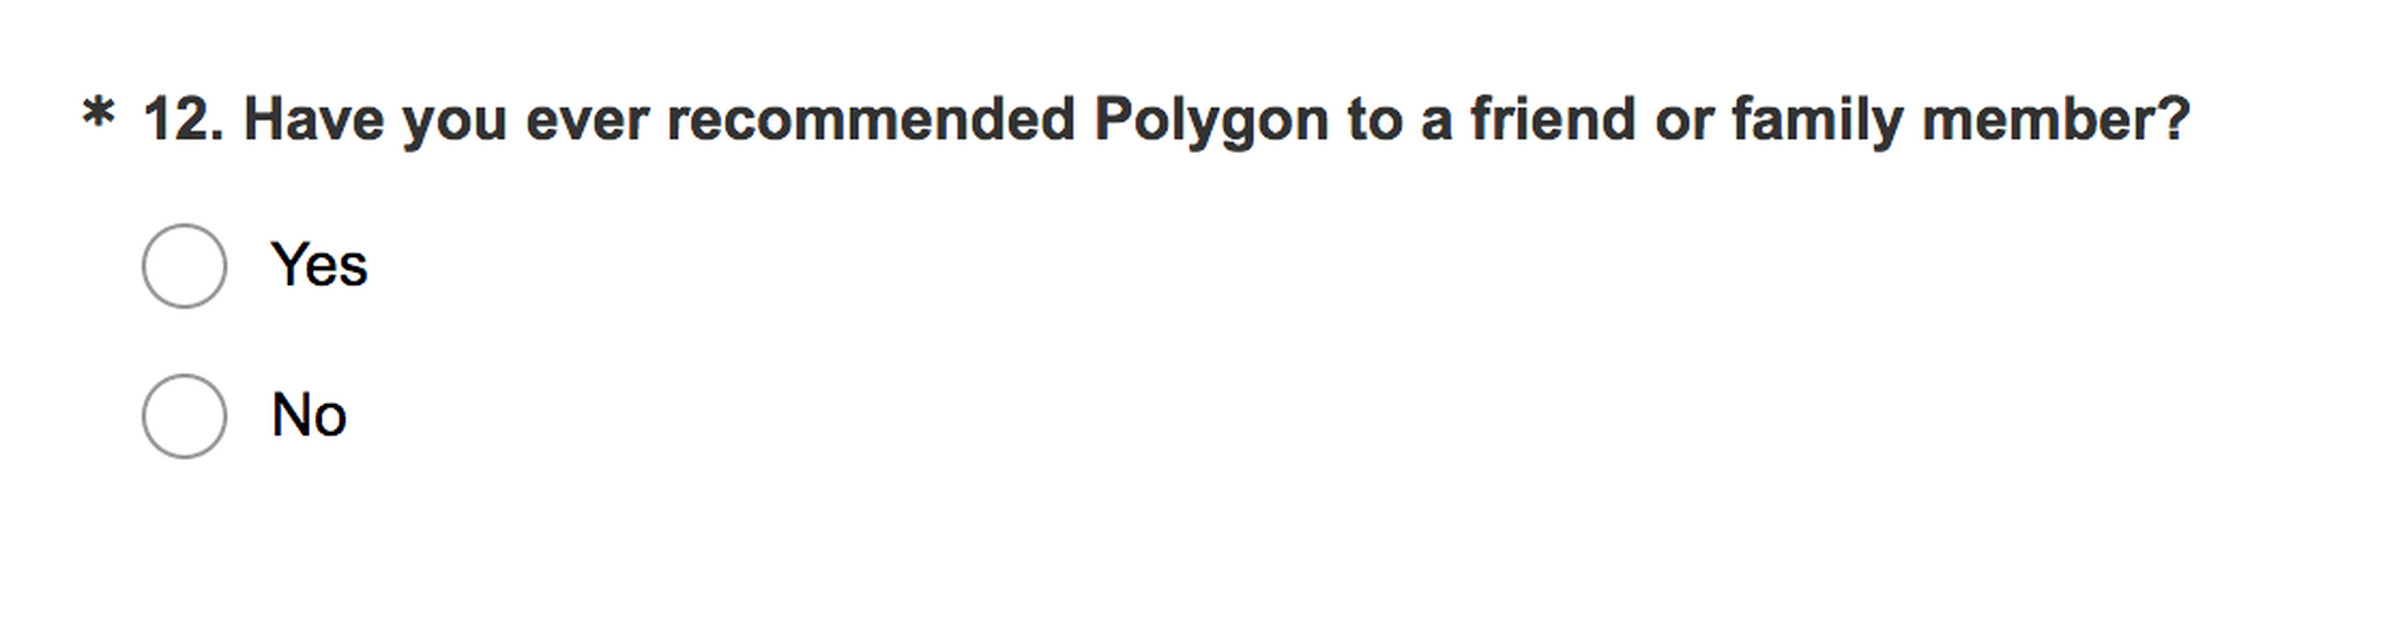 Sample of a survey question from a Polygon.com survey